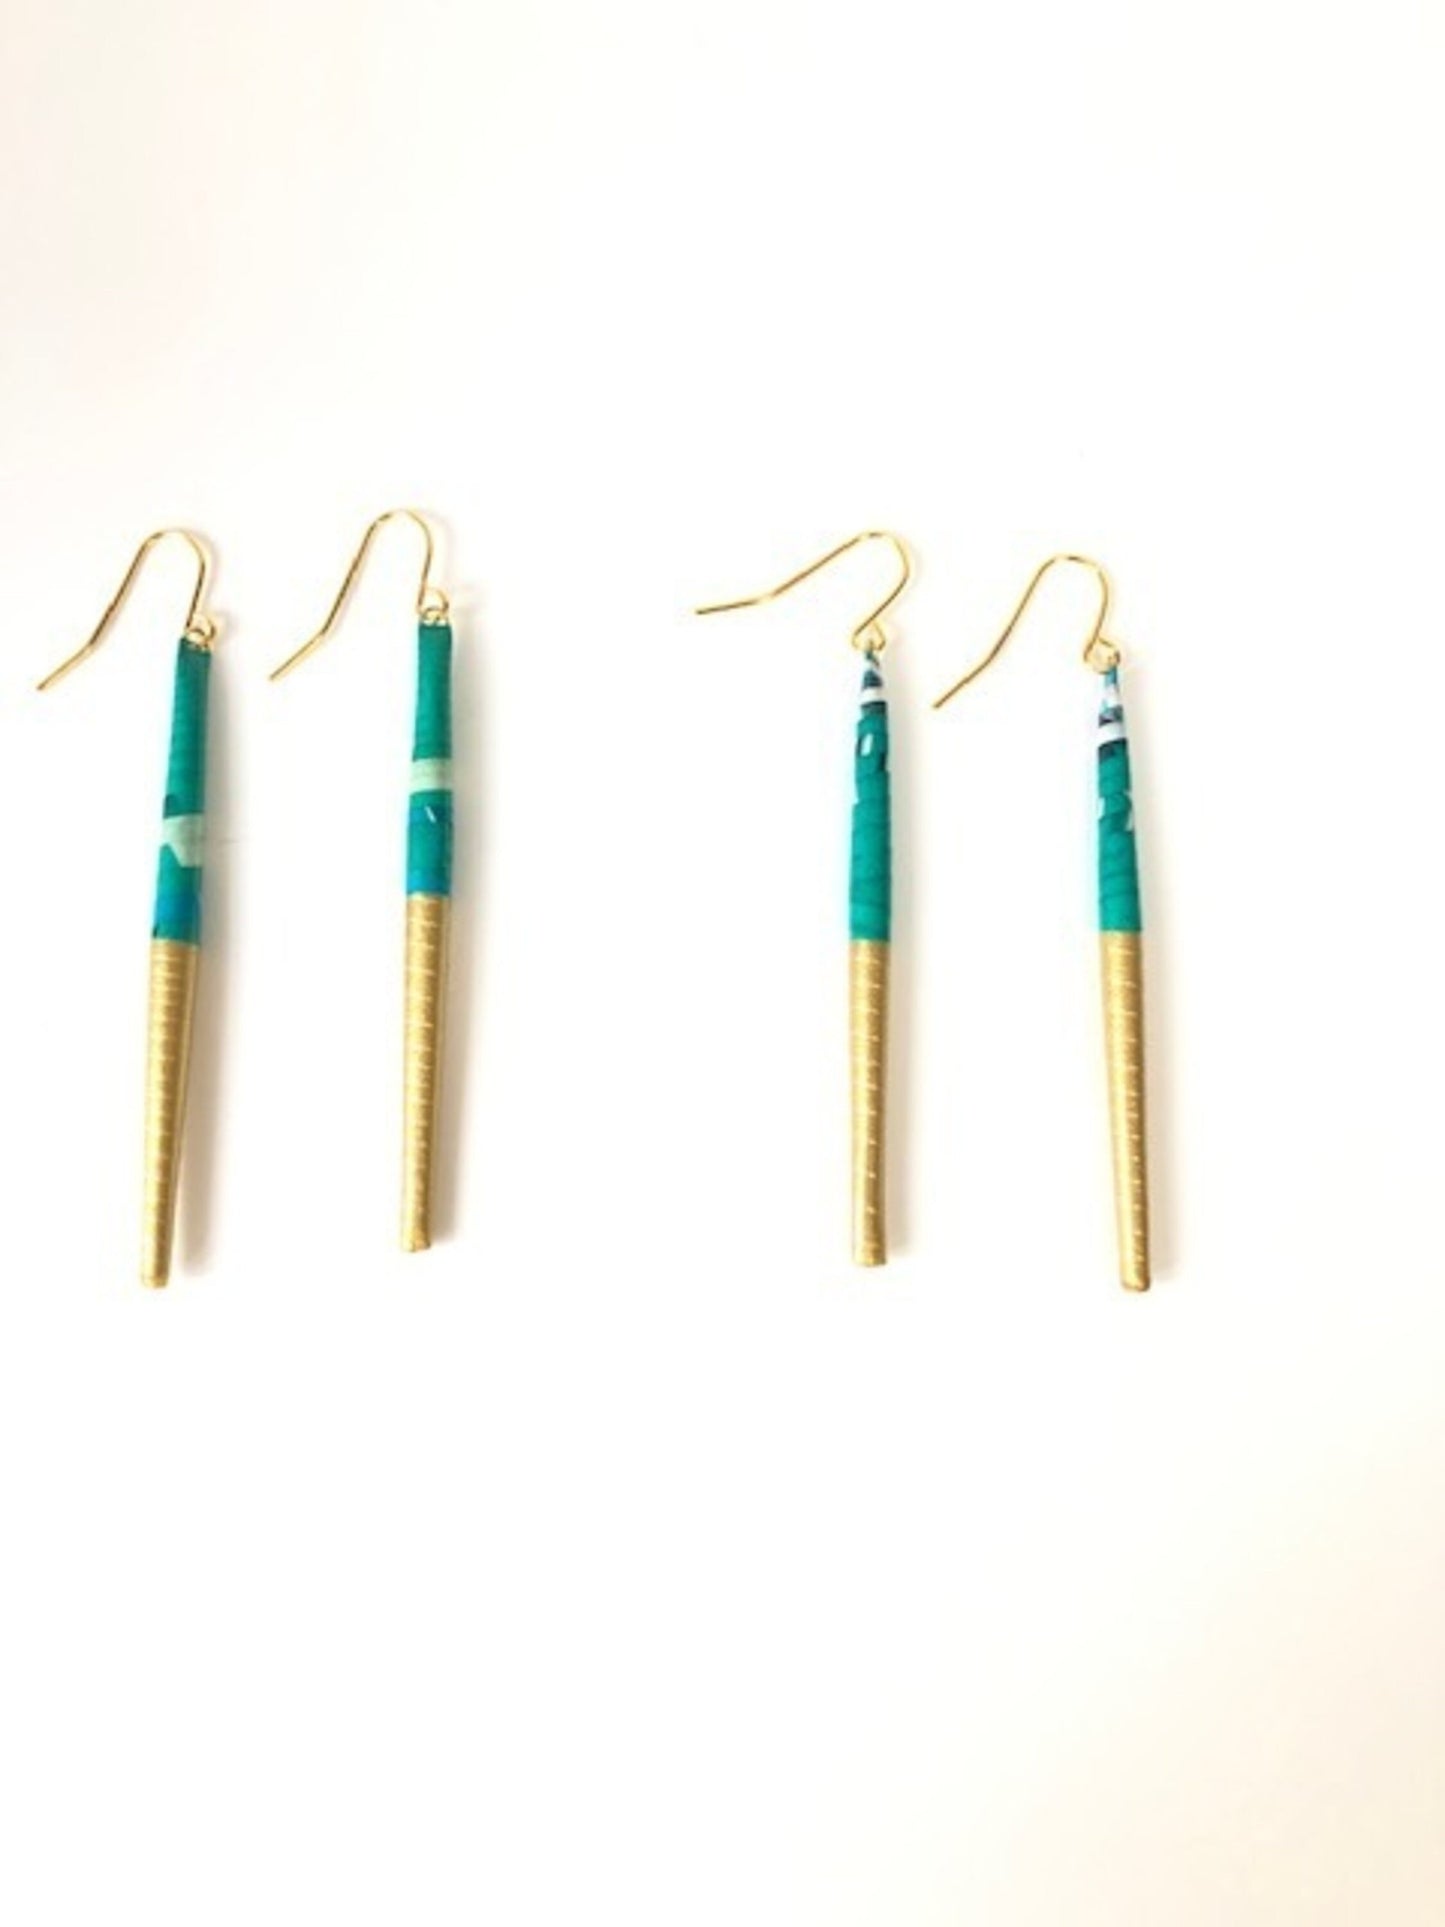 Handmade Recycled Paper Gold/Emerald Drop Earrings